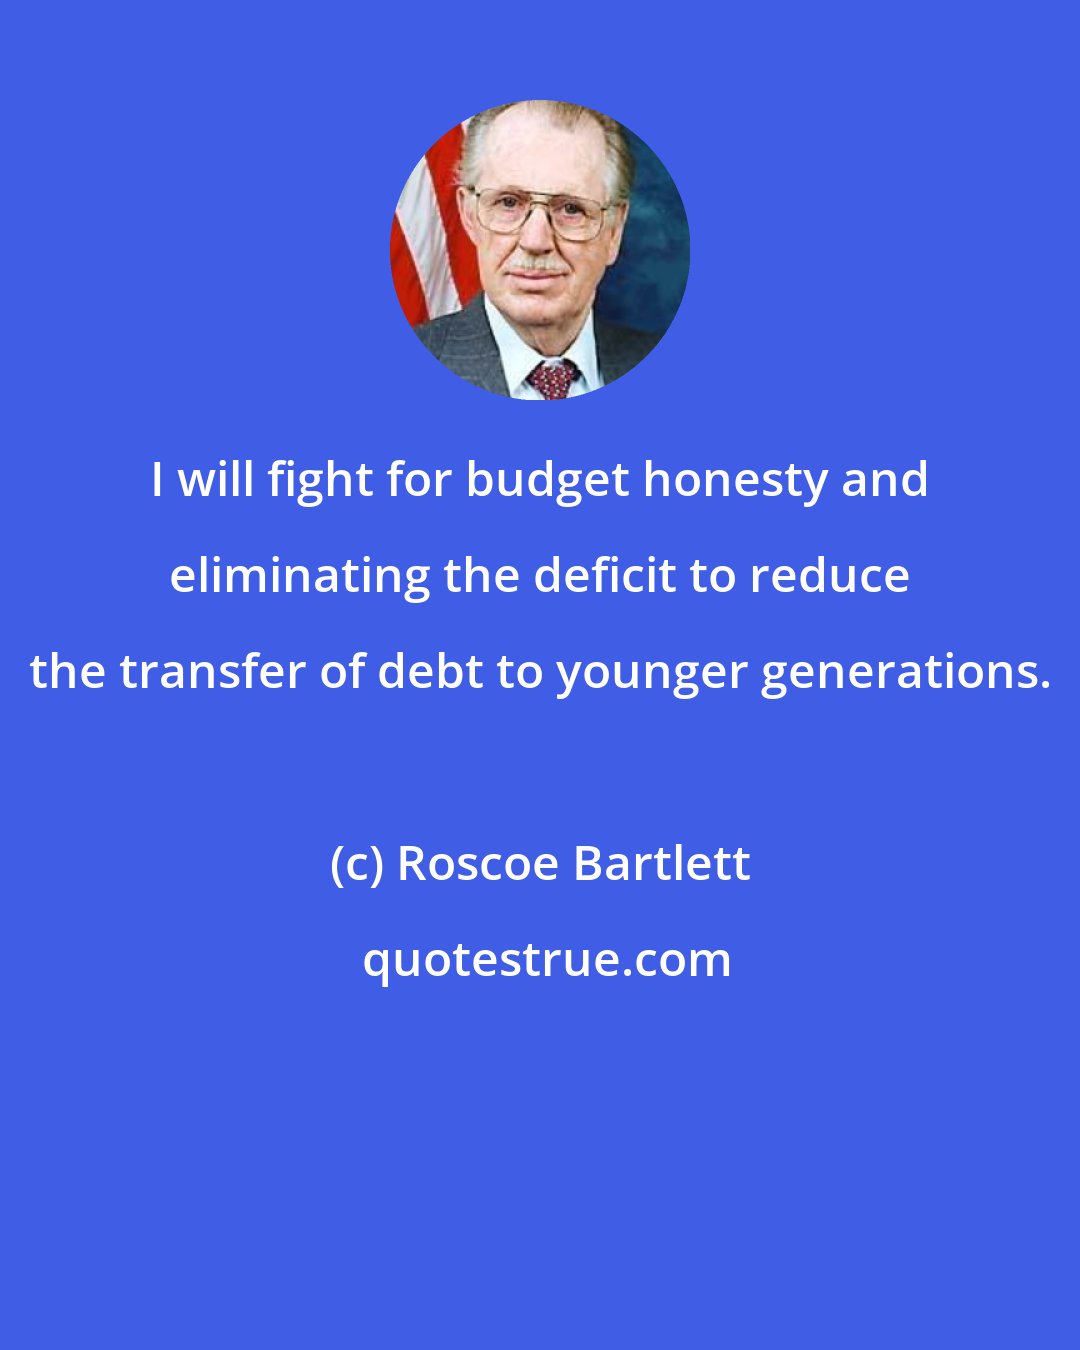 Roscoe Bartlett: I will fight for budget honesty and eliminating the deficit to reduce the transfer of debt to younger generations.